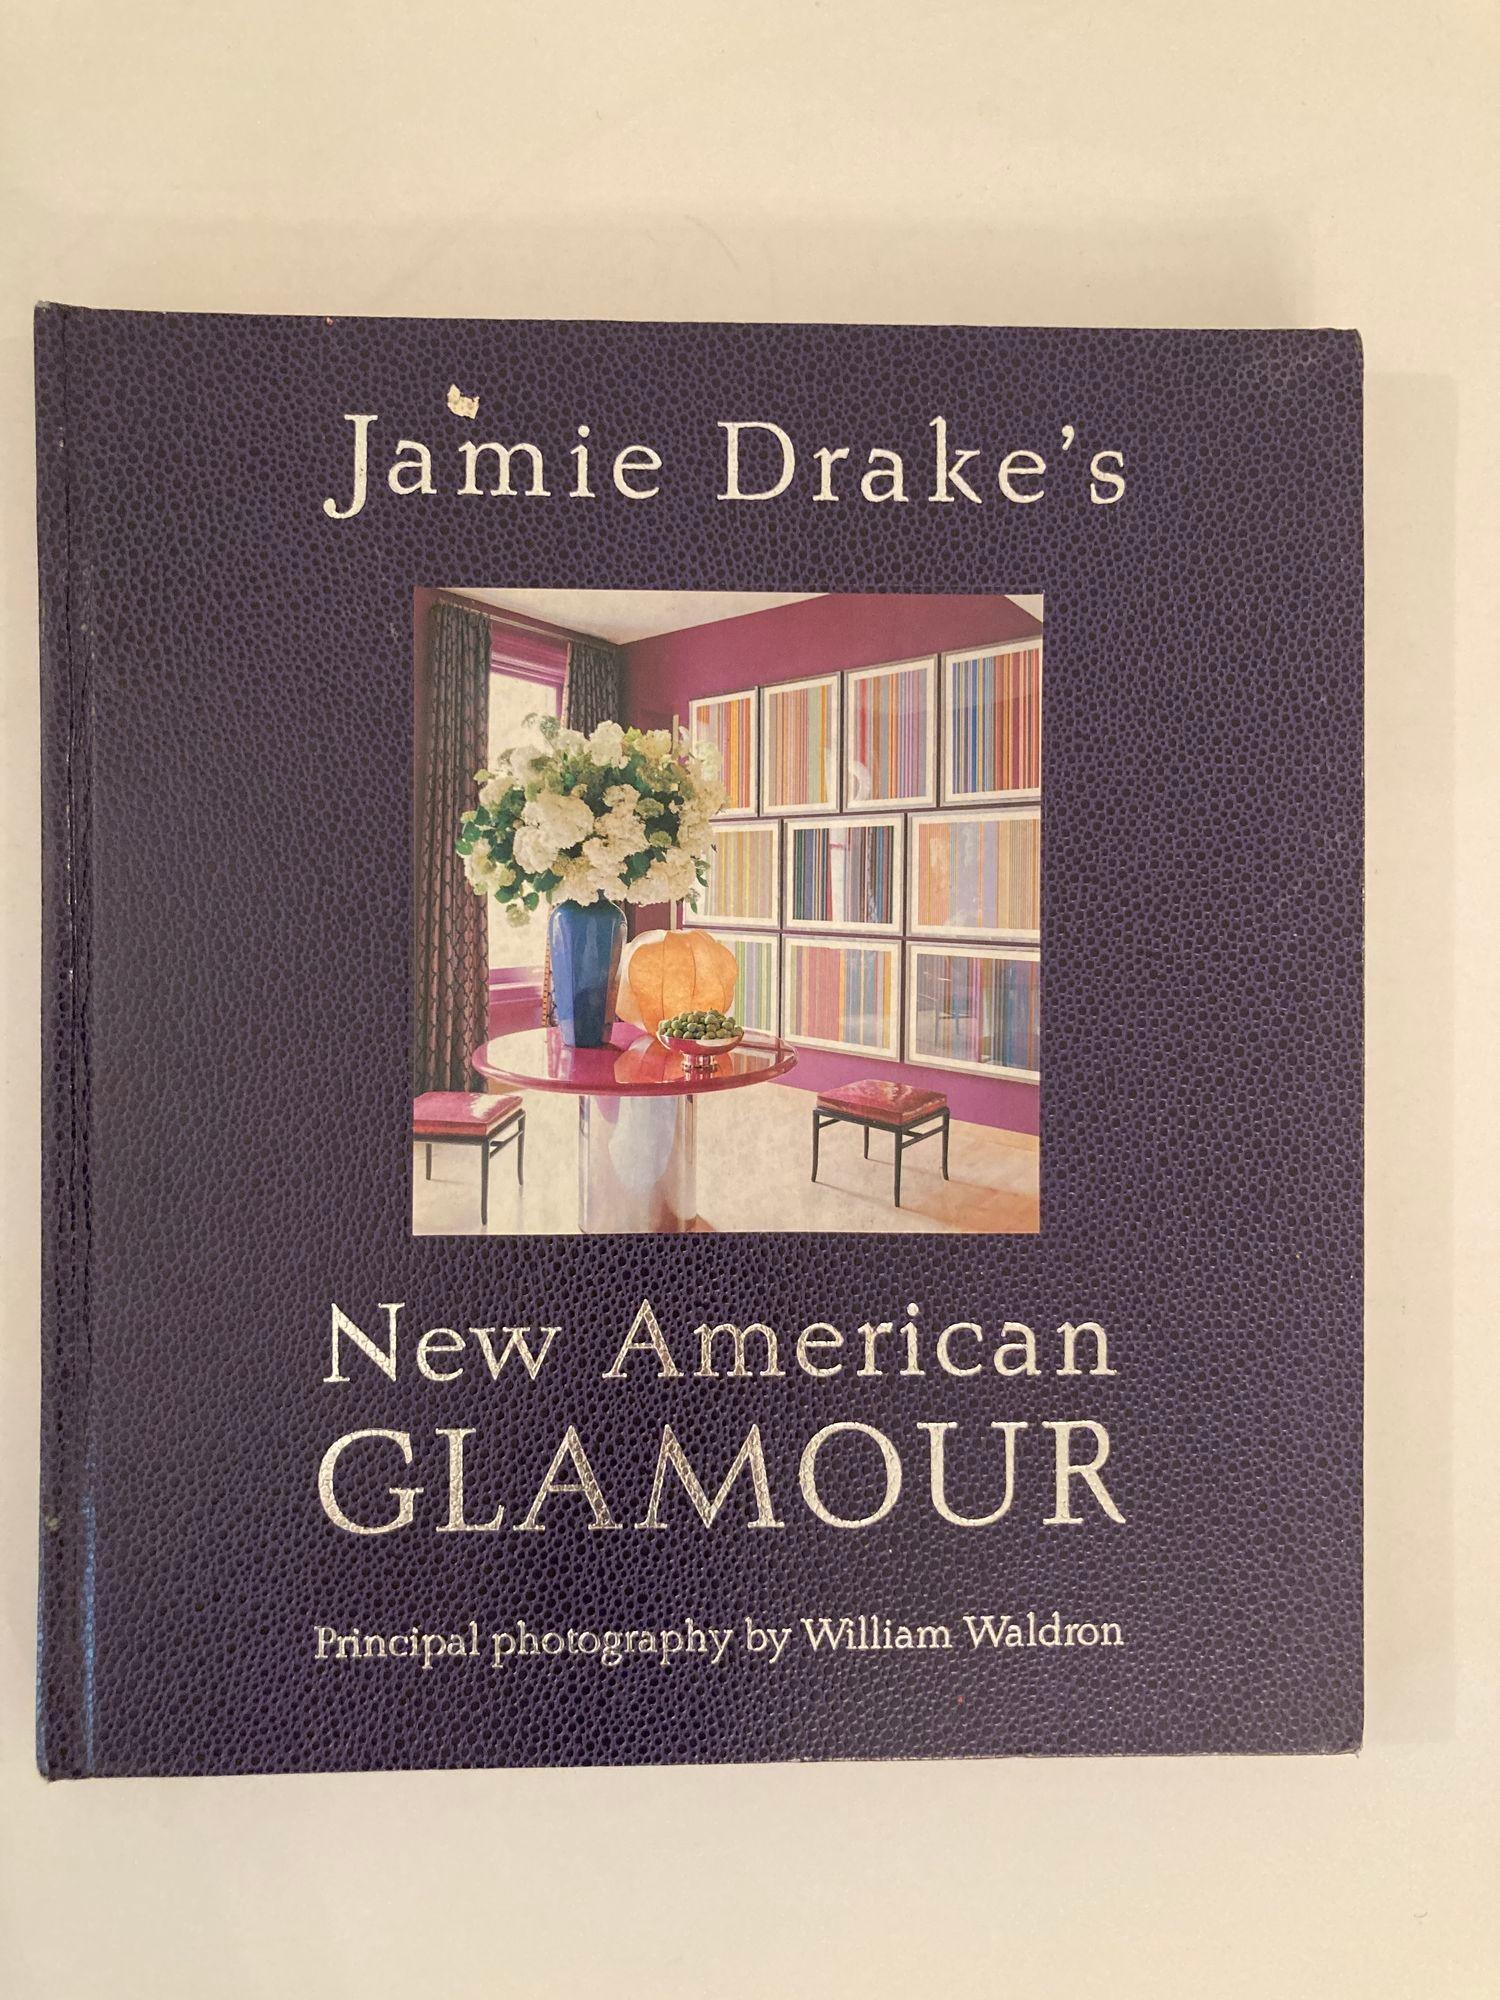 Jamie Drake's New American glamour.
Designer hardcover Coffee table book.
New York: Bulfinch Press, 2005.
Stated first edition hardcover with no dust jacket as issued. 175 pp.
A colorful book by American designer Jamie Drake that illustrates his